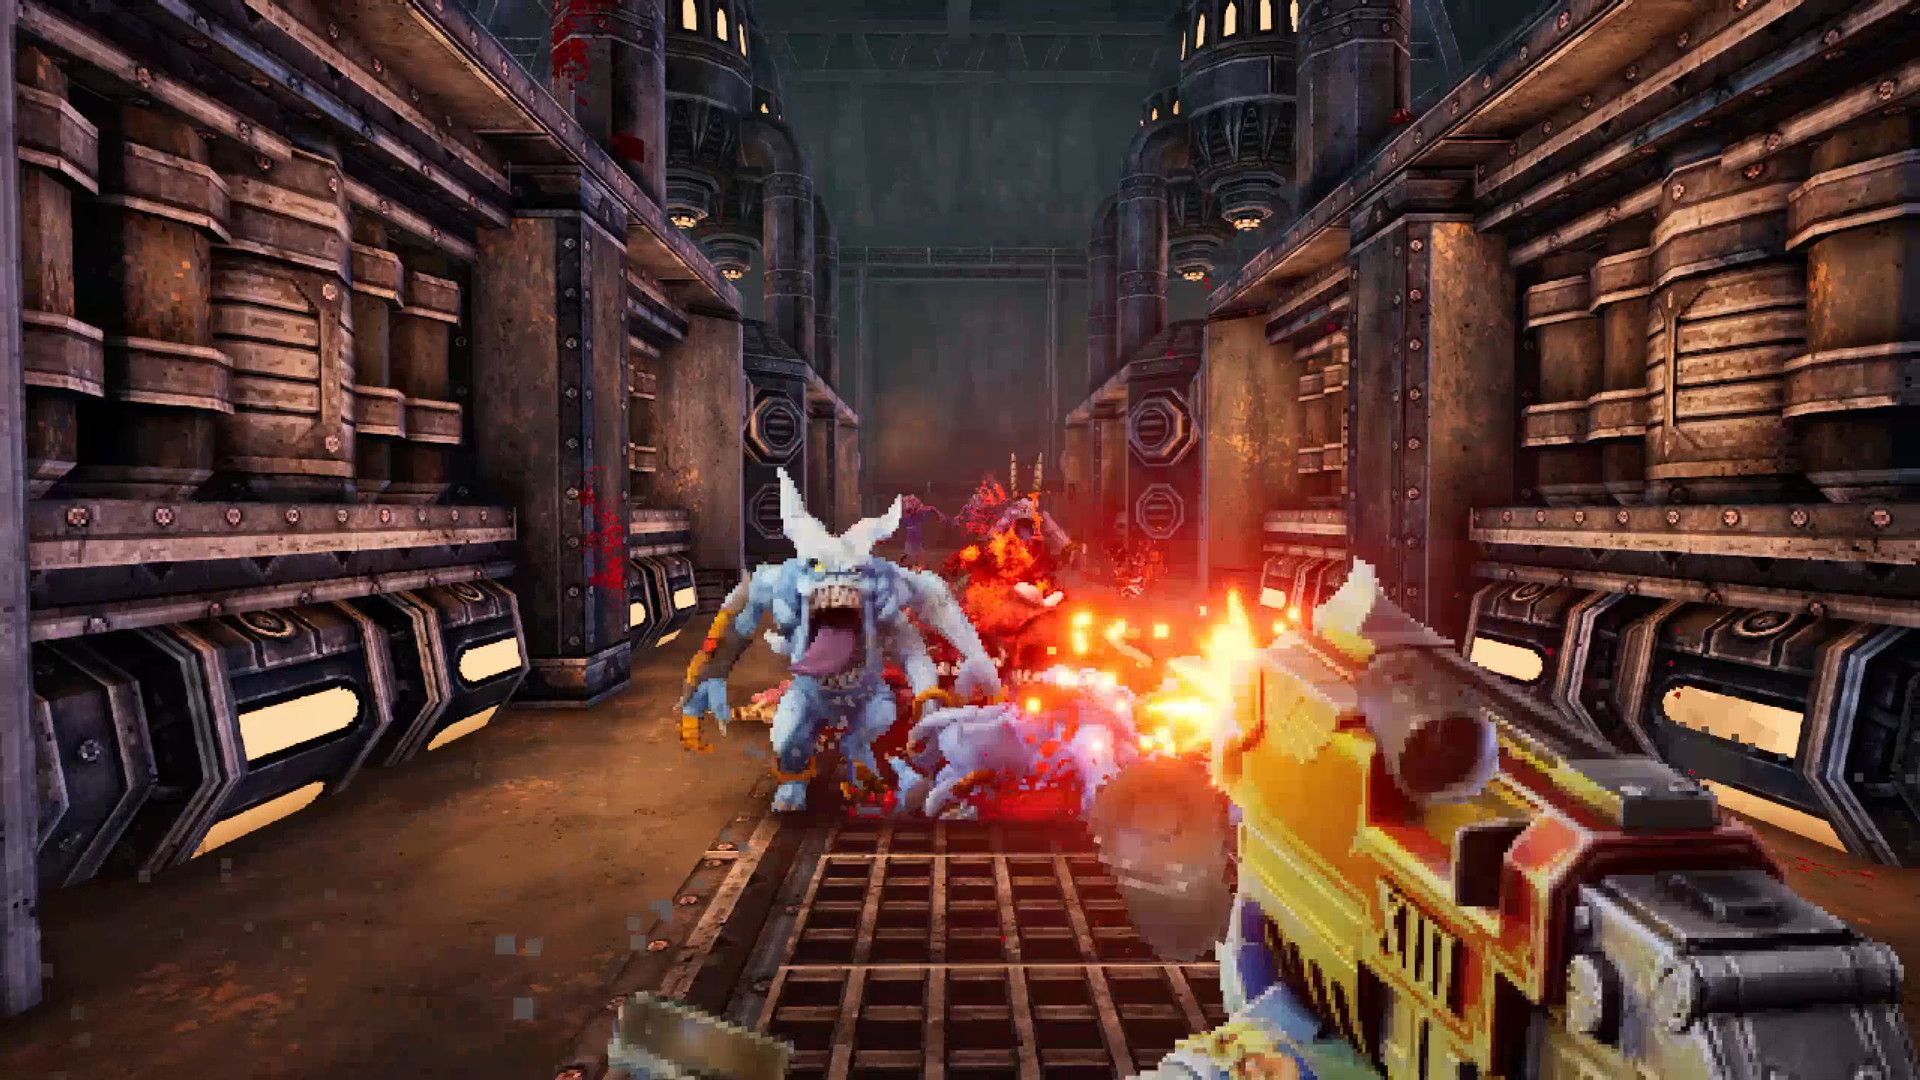 Warhammer 40,000 Boltgun is a New Retro-Inspired First-Person Shooter